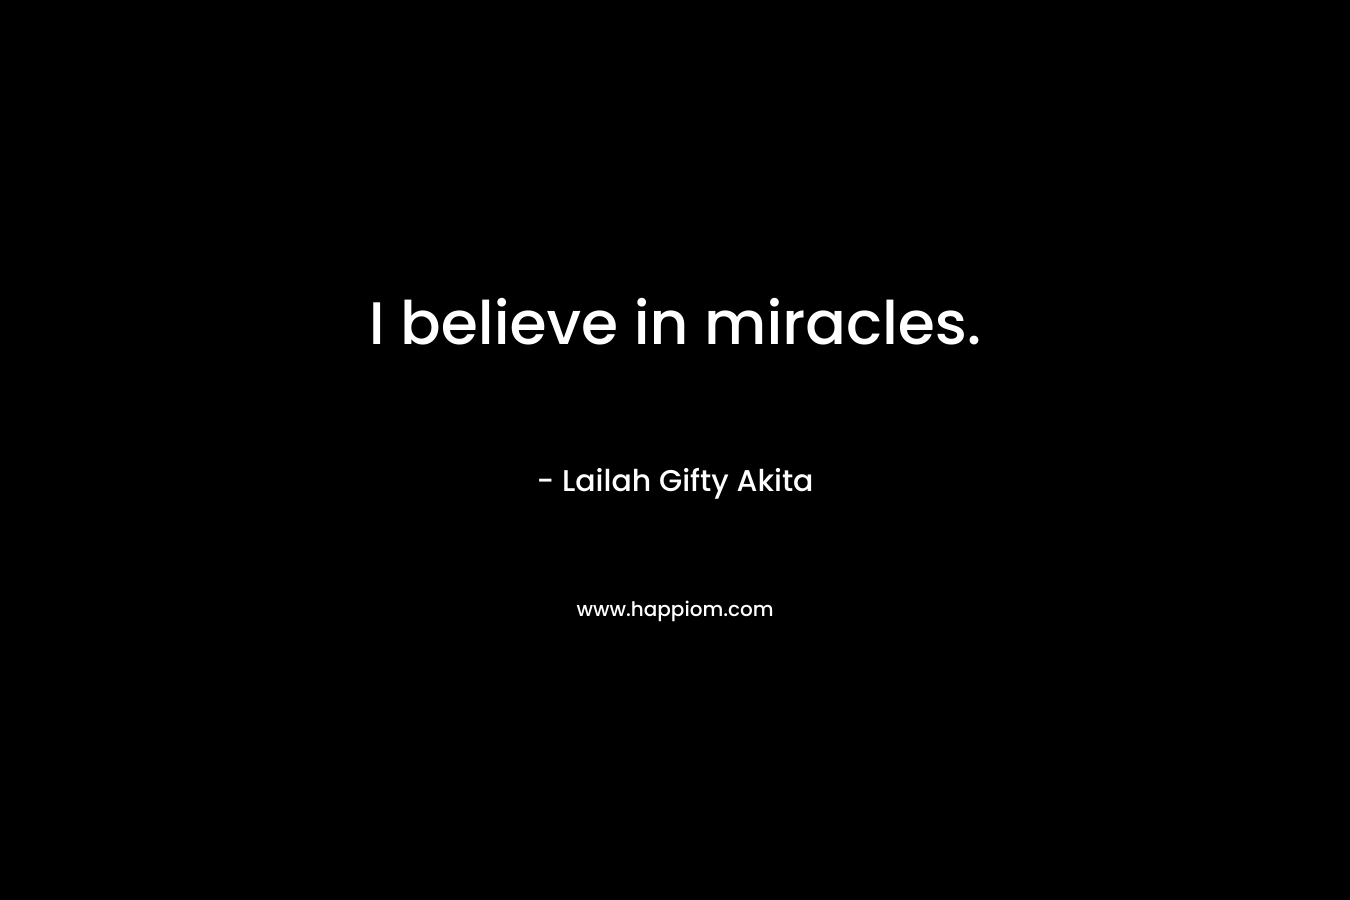 I believe in miracles.